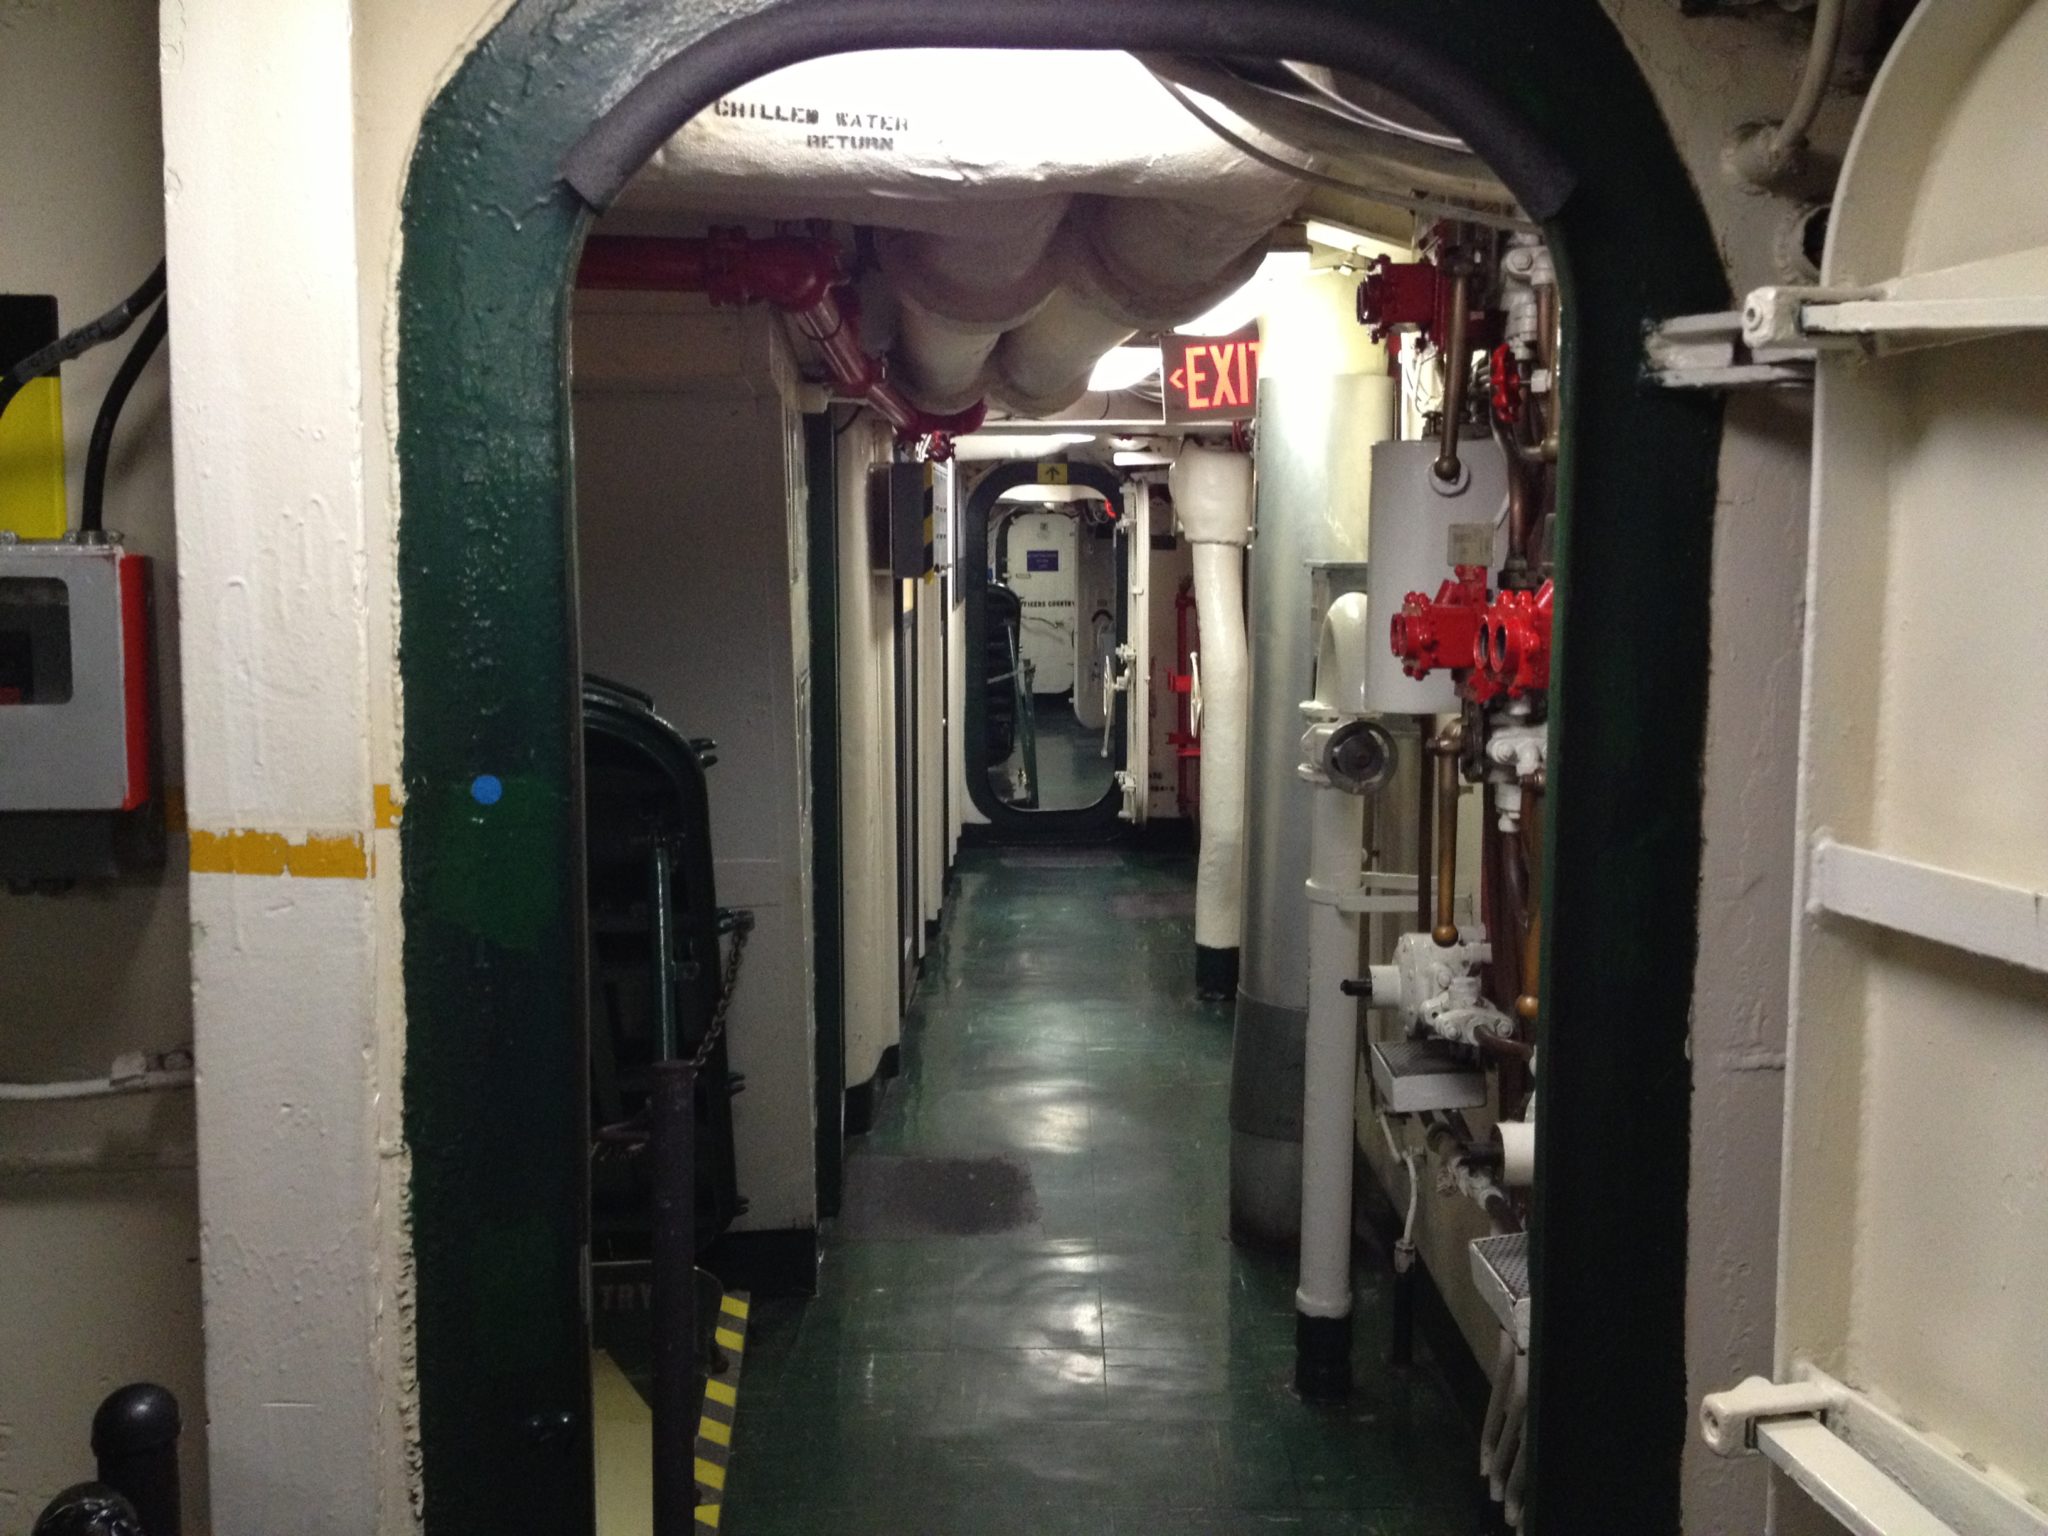 Walking through the USS Midway you get a good sense of what life was like onboard.